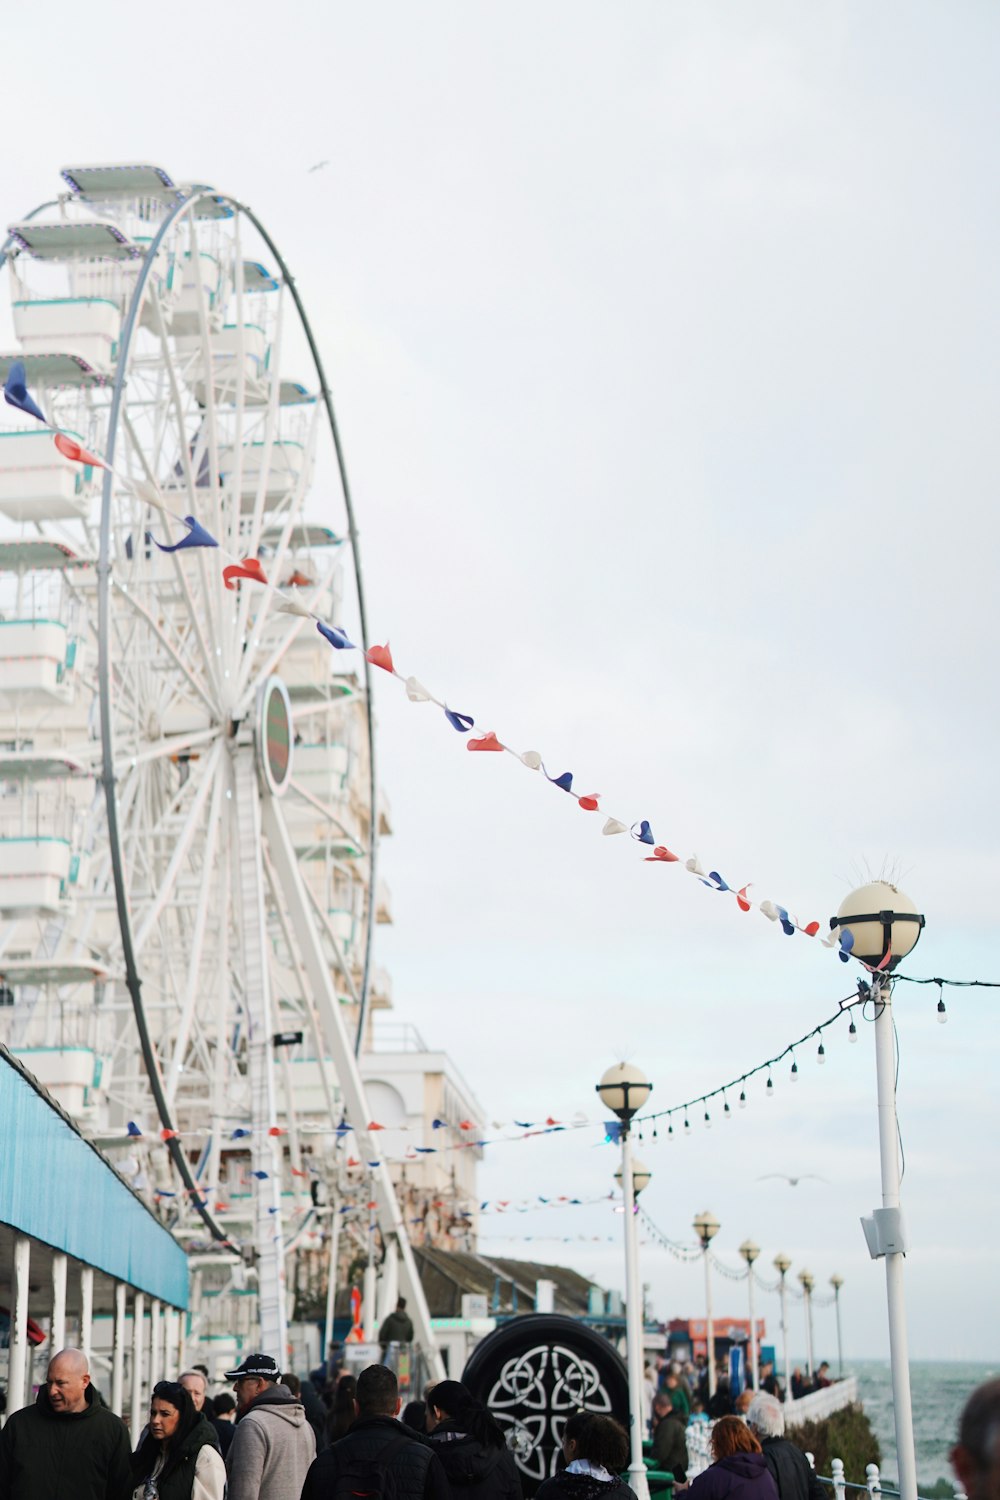 a crowd of people standing around a ferris wheel